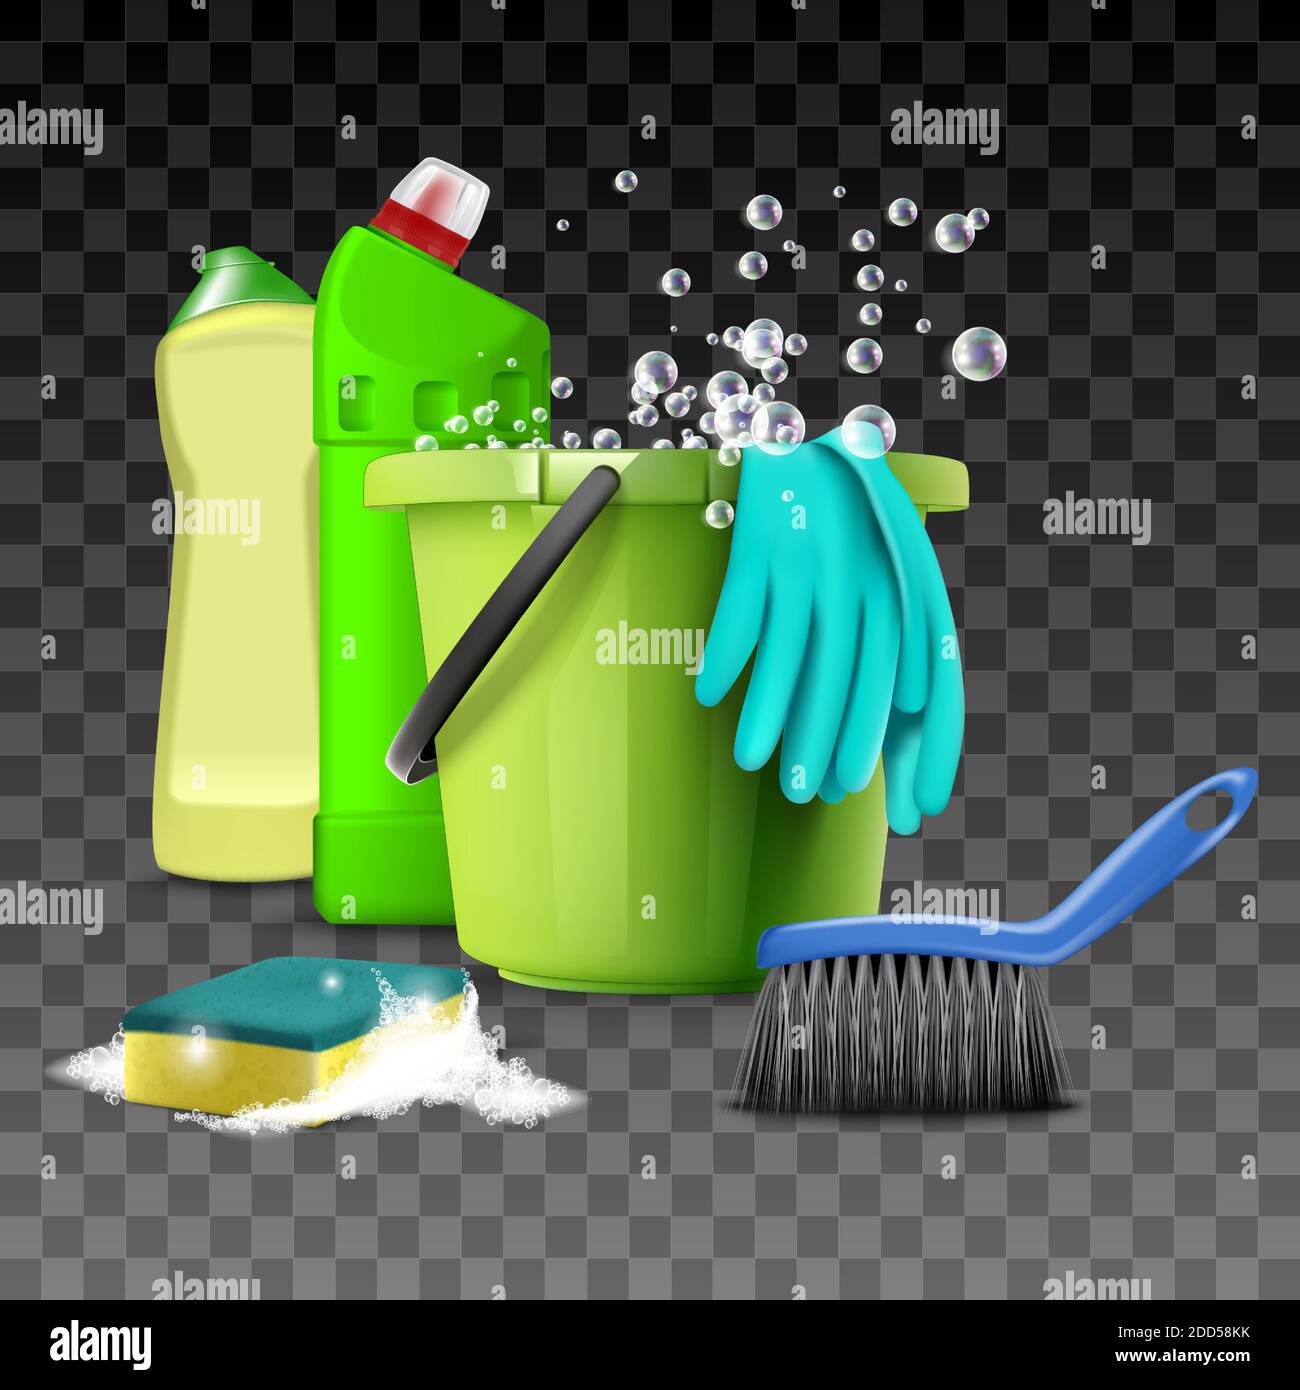 https://c8.alamy.com/comp/2DD58KK/3d-realistic-vector-icon-illustration-of-cleaning-products-kitchen-and-bathroom-equipment-for-washing-toilet-broom-bucket-with-water-and-sponge-2DD58KK.jpg